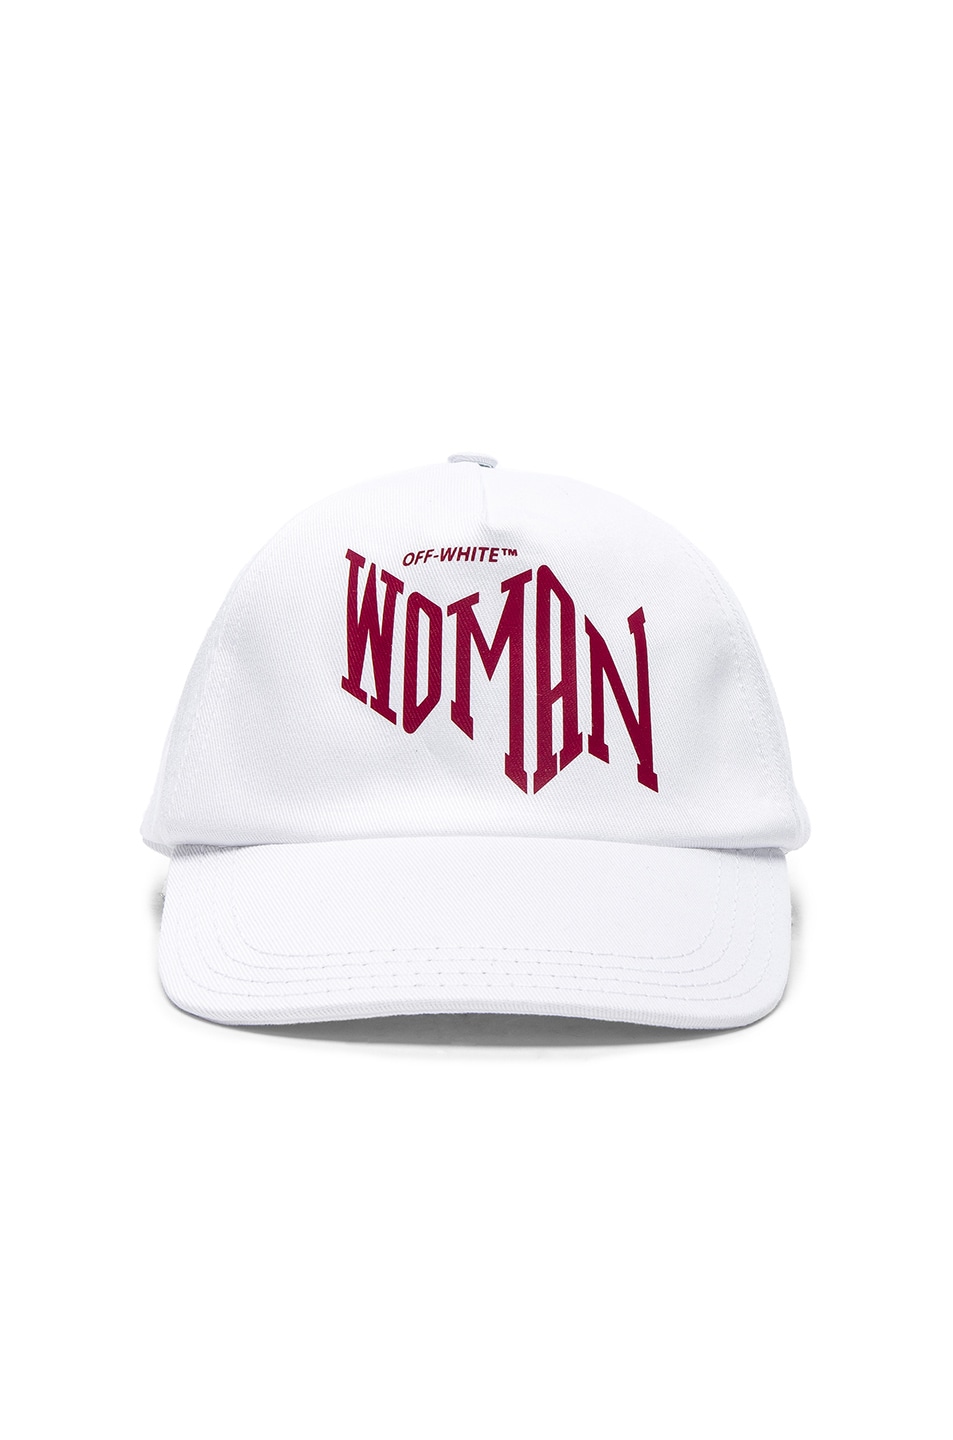 Image 1 of OFF-WHITE Woman Baseball Cap in White & Bordeaux